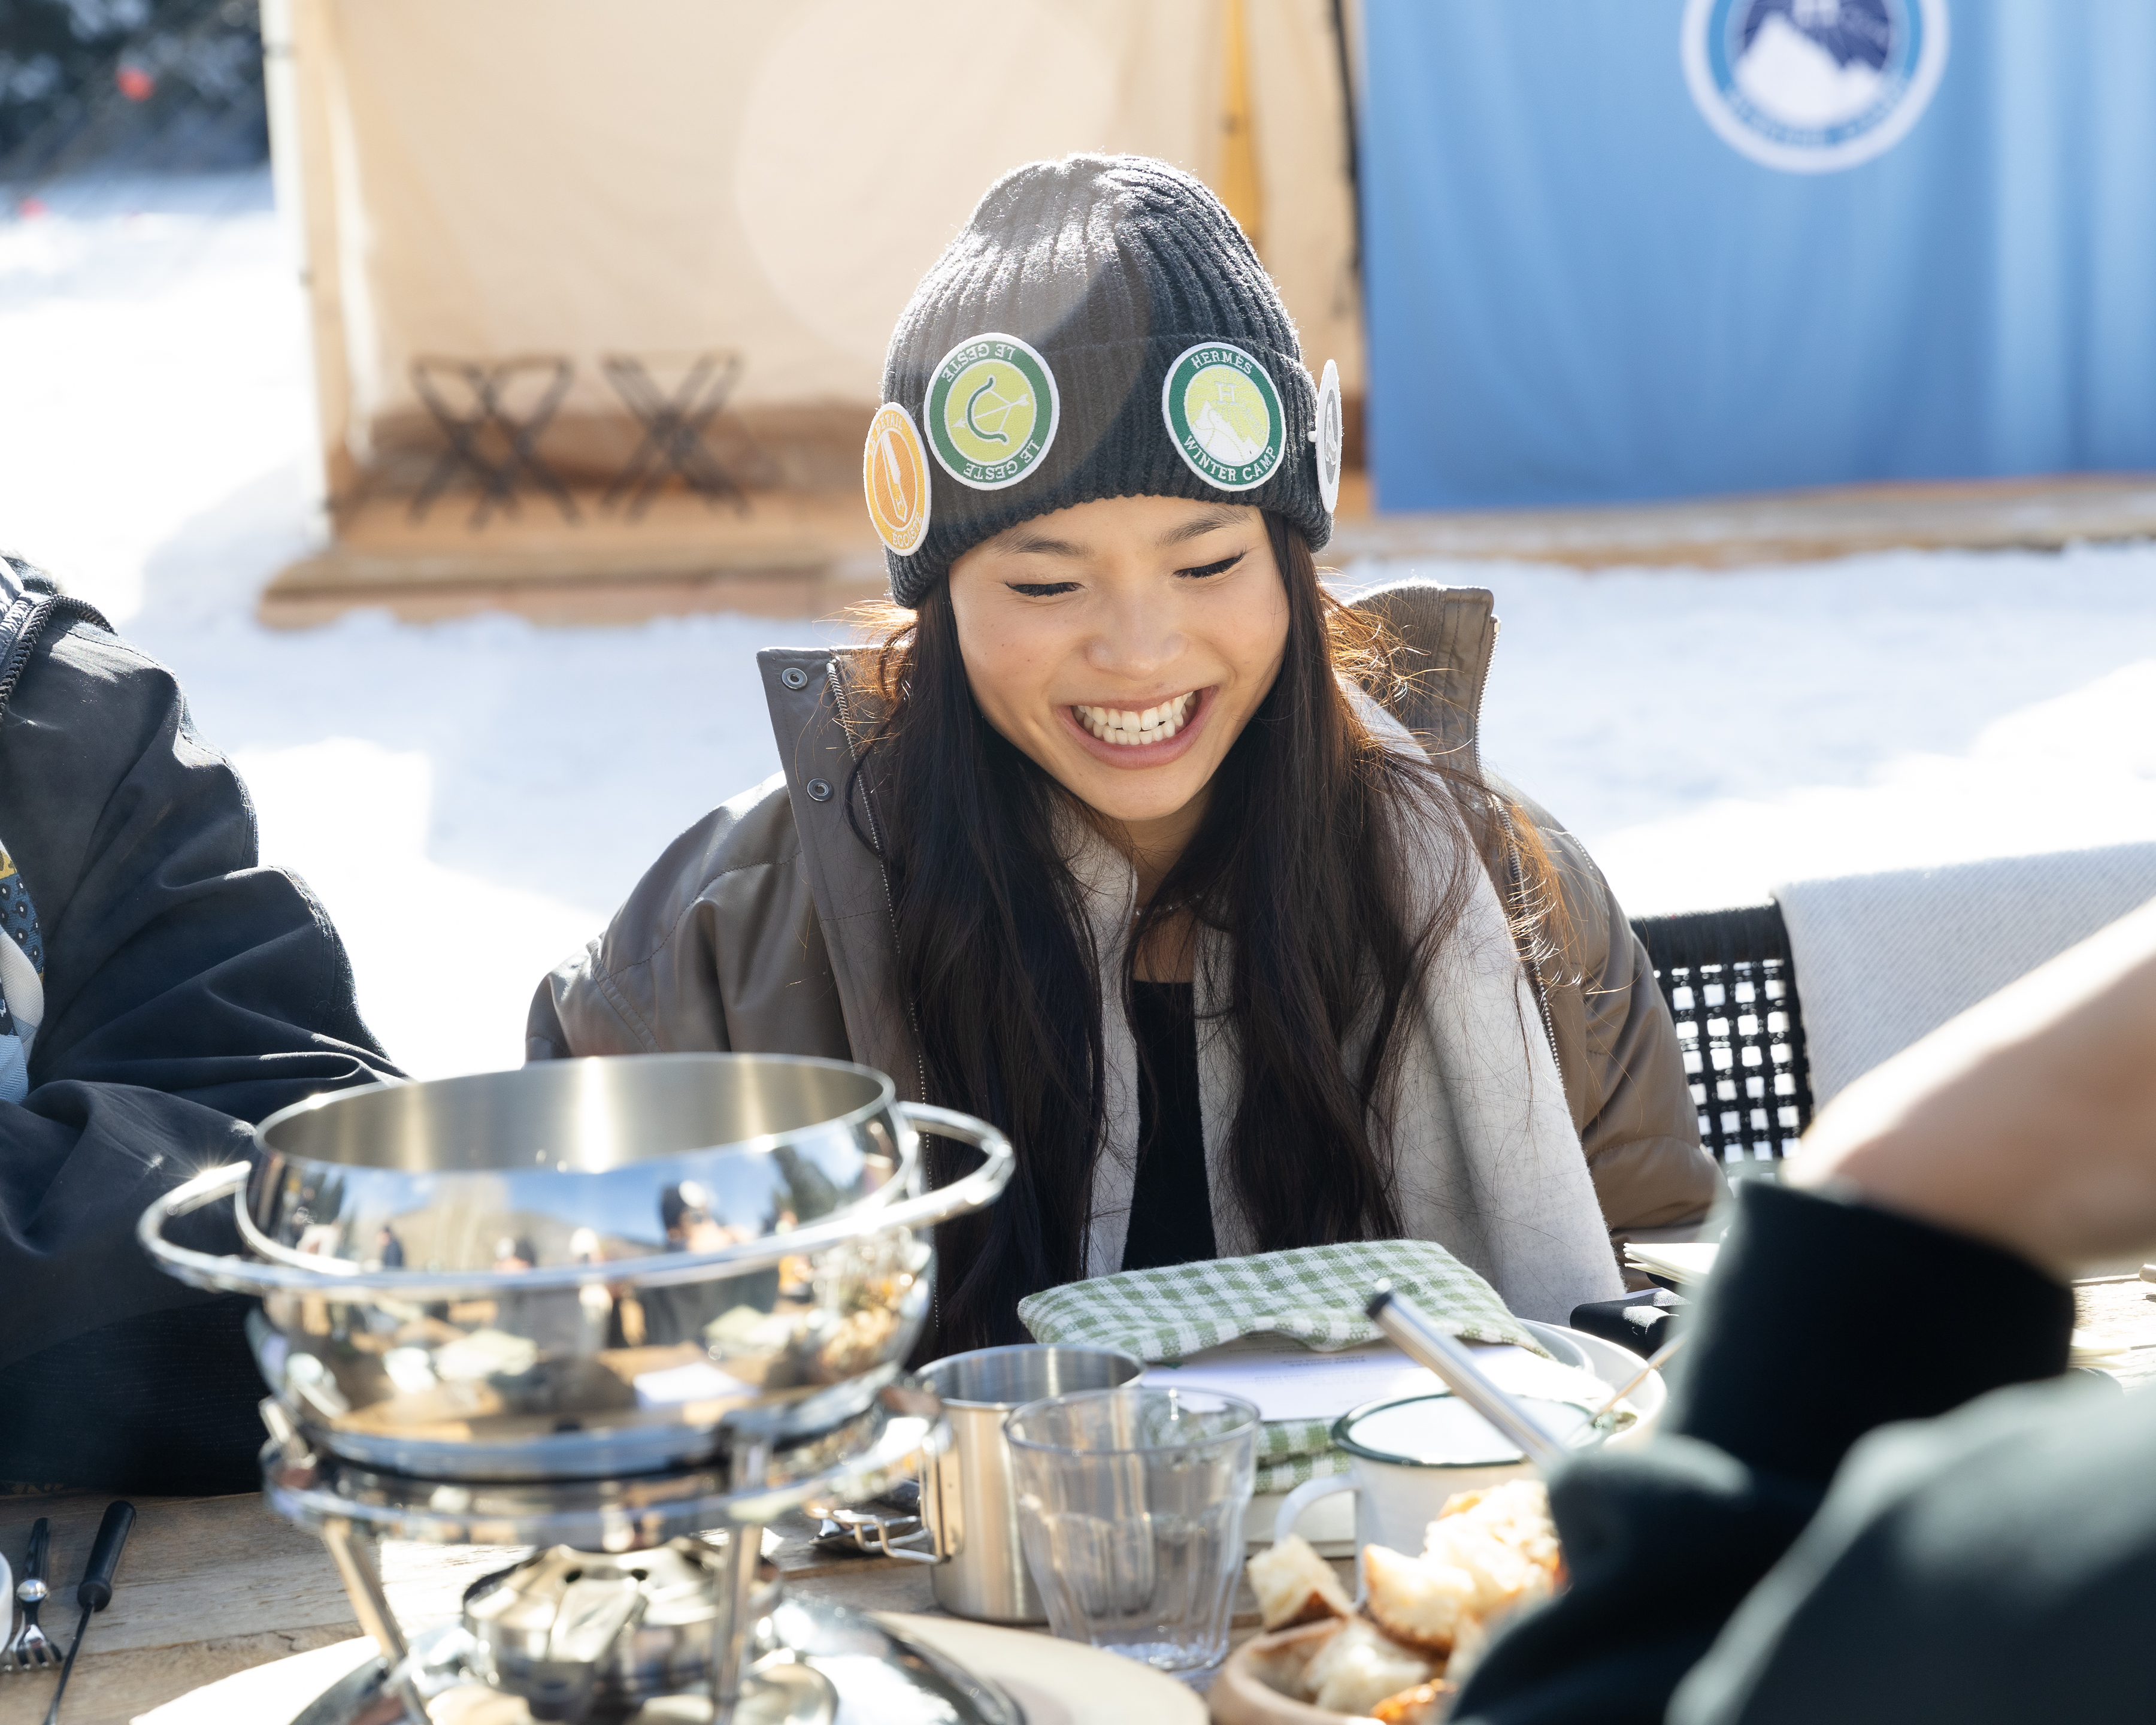 Athlete Chloe Kim seated for lunch at Hermès Winter Camp in Aspen